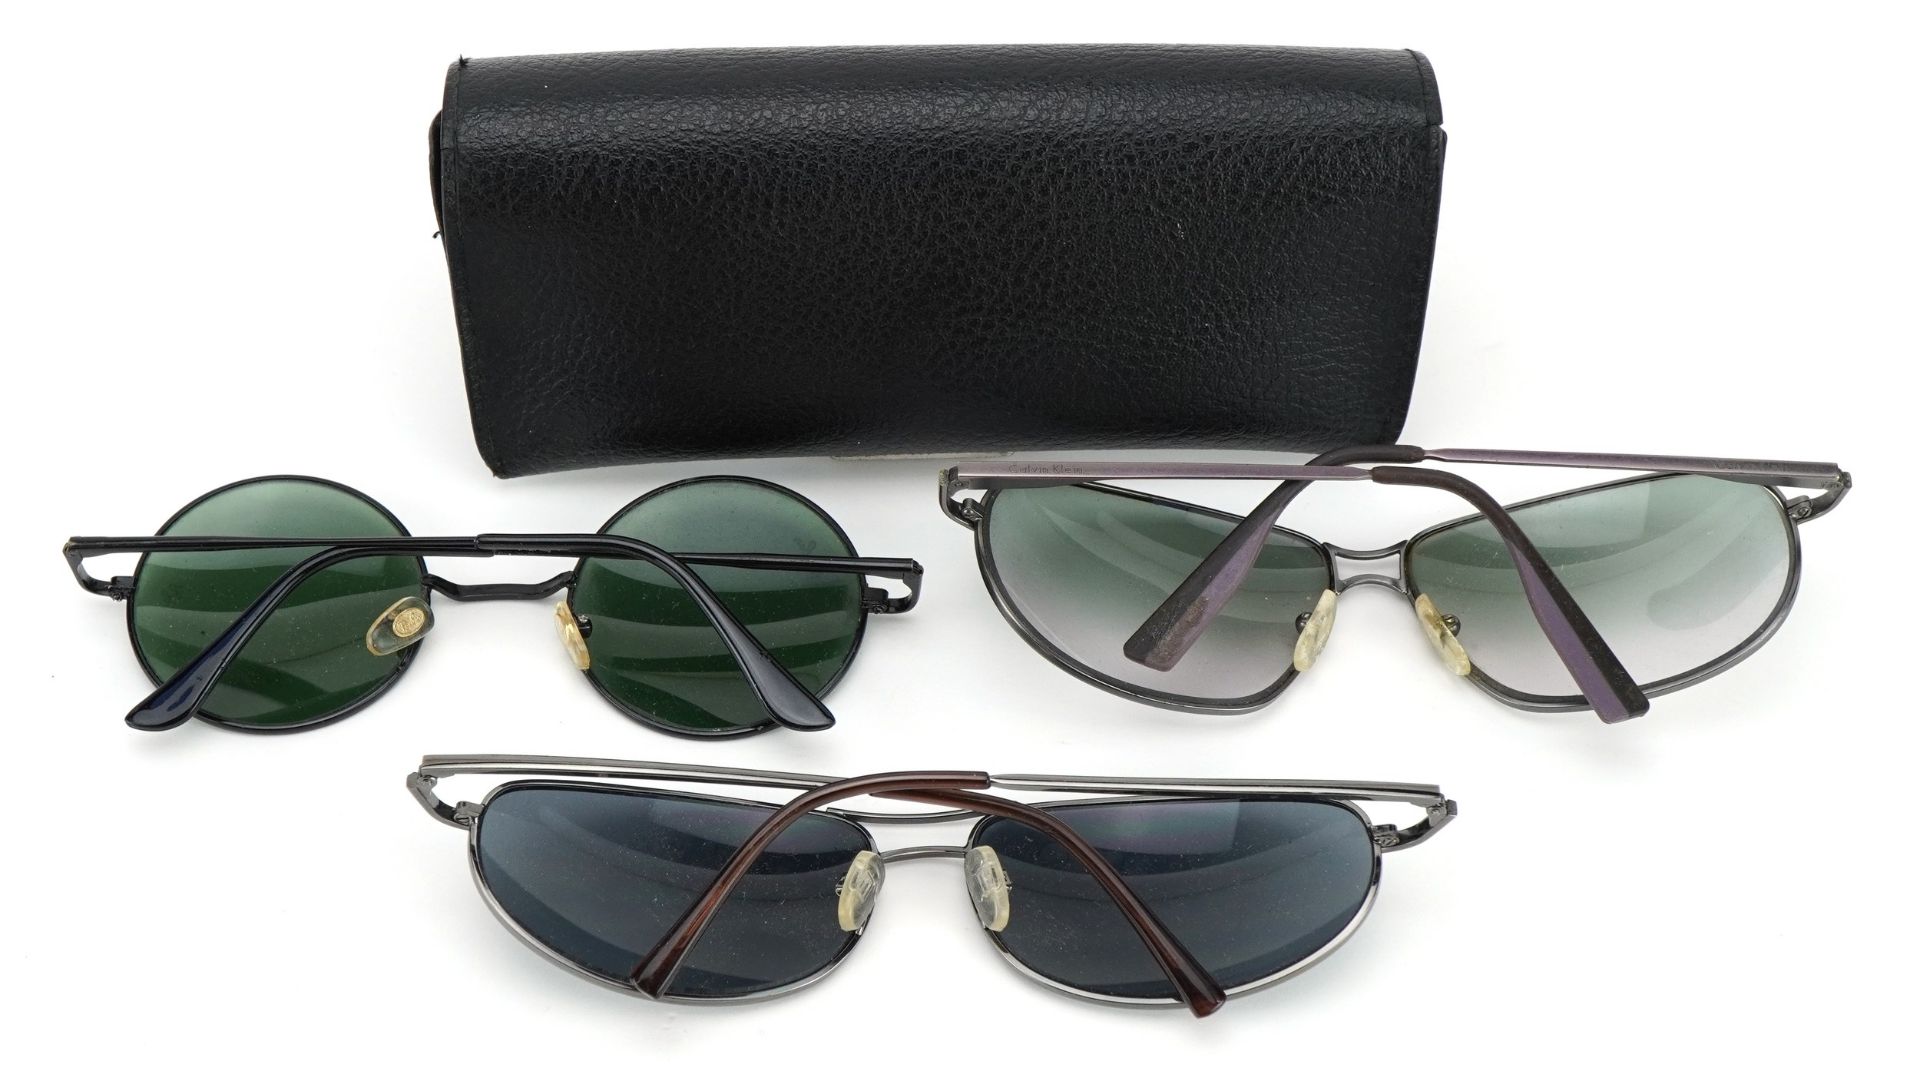 Three pairs of vintage sunglasses including RayBan and Calvin Klein - Image 2 of 3